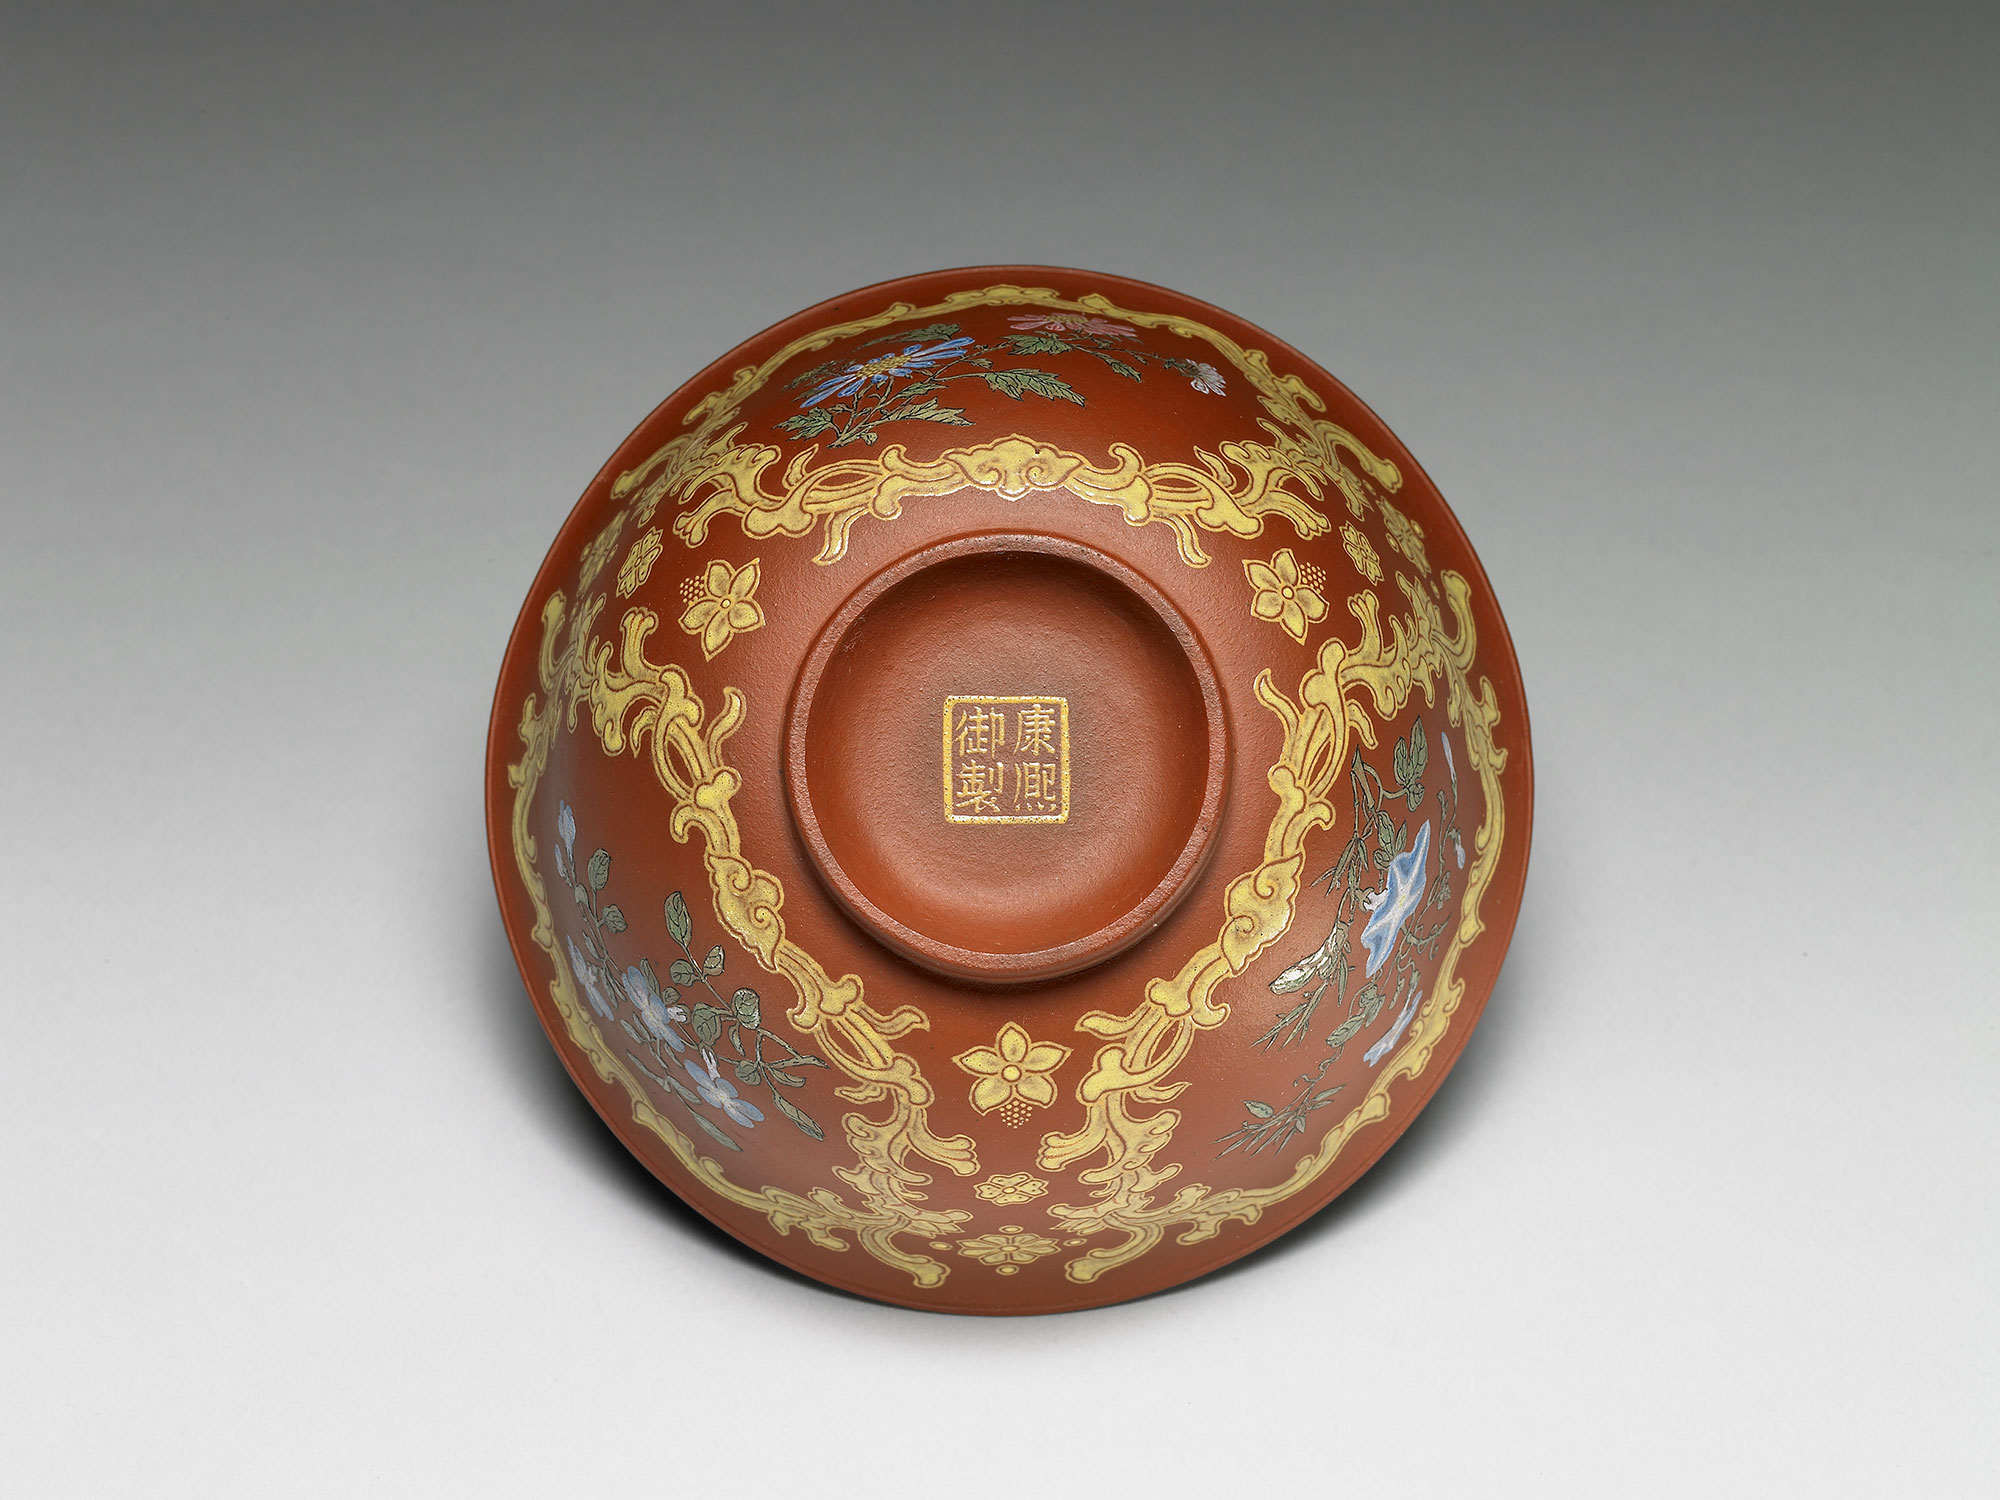 Yixing tea bowl with flowers in painted enamels